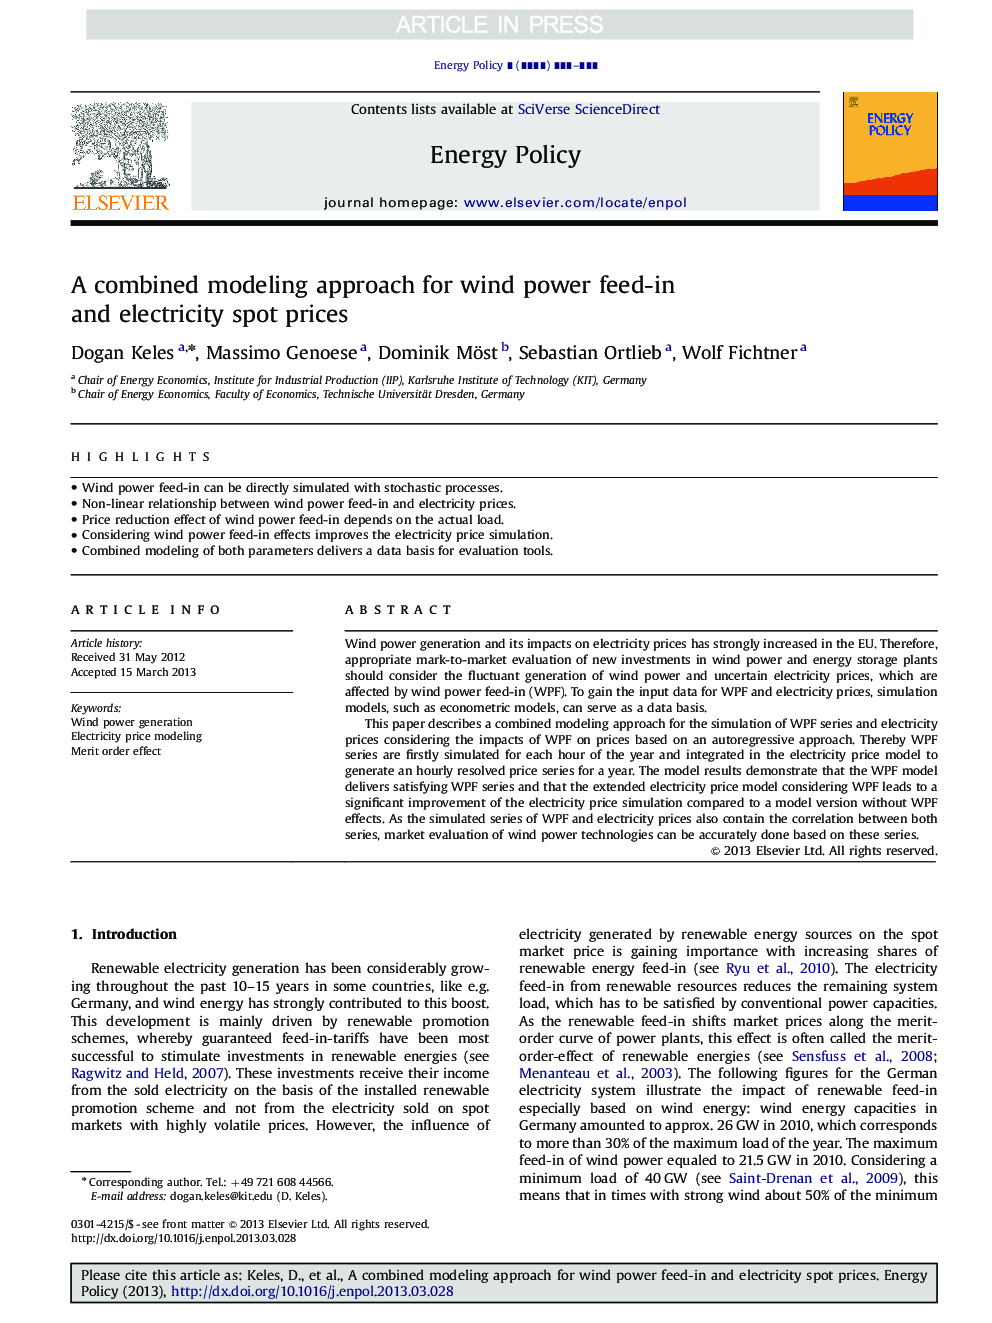 A combined modeling approach for wind power feed-in and electricity spot prices